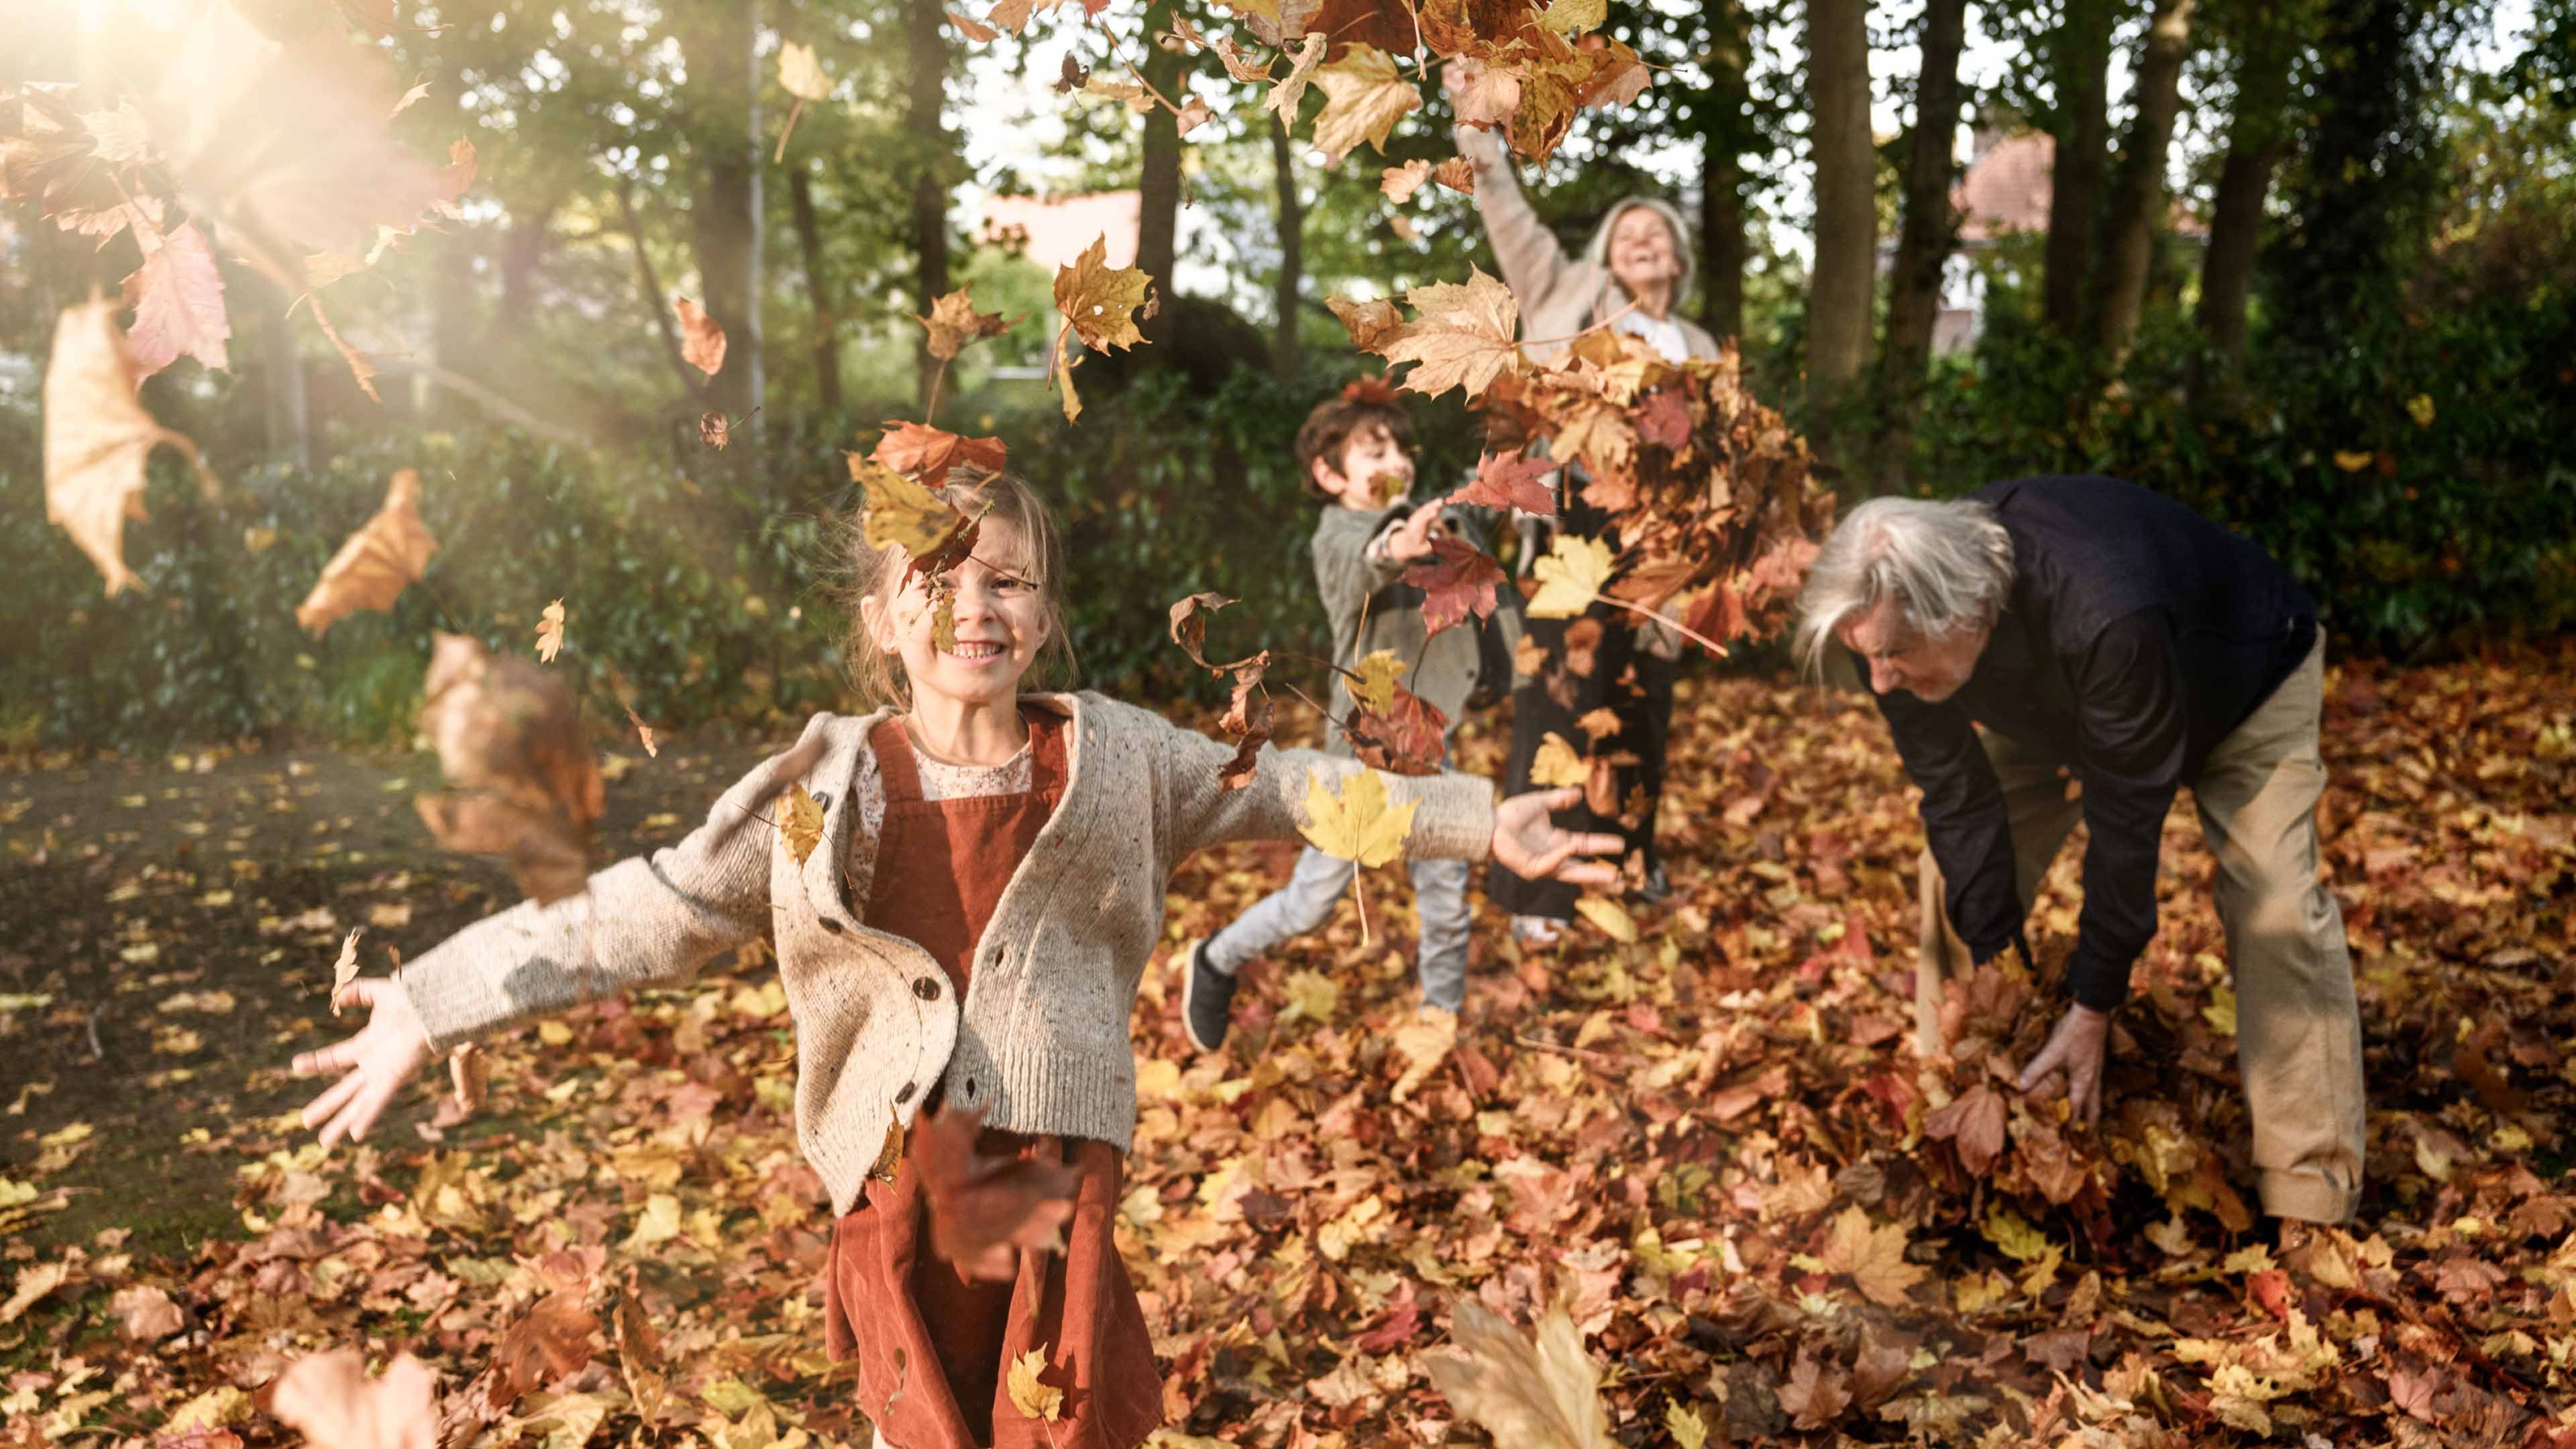 A girl, a boy and their grandparents playing with leaves